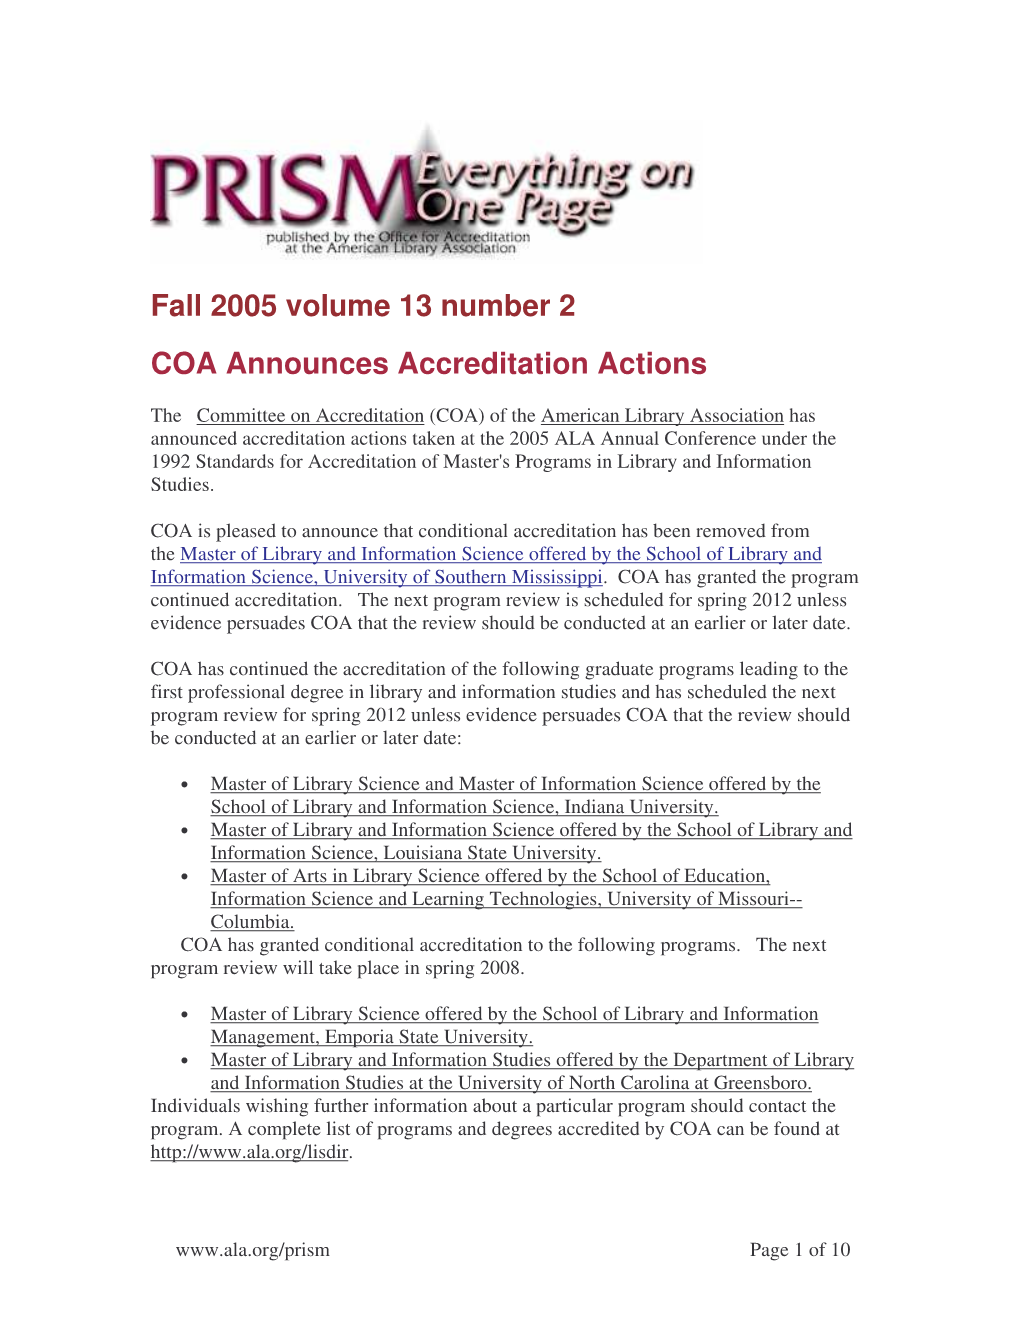 Fall 2005 Volume 13 Number 2 COA Announces Accreditation Actions